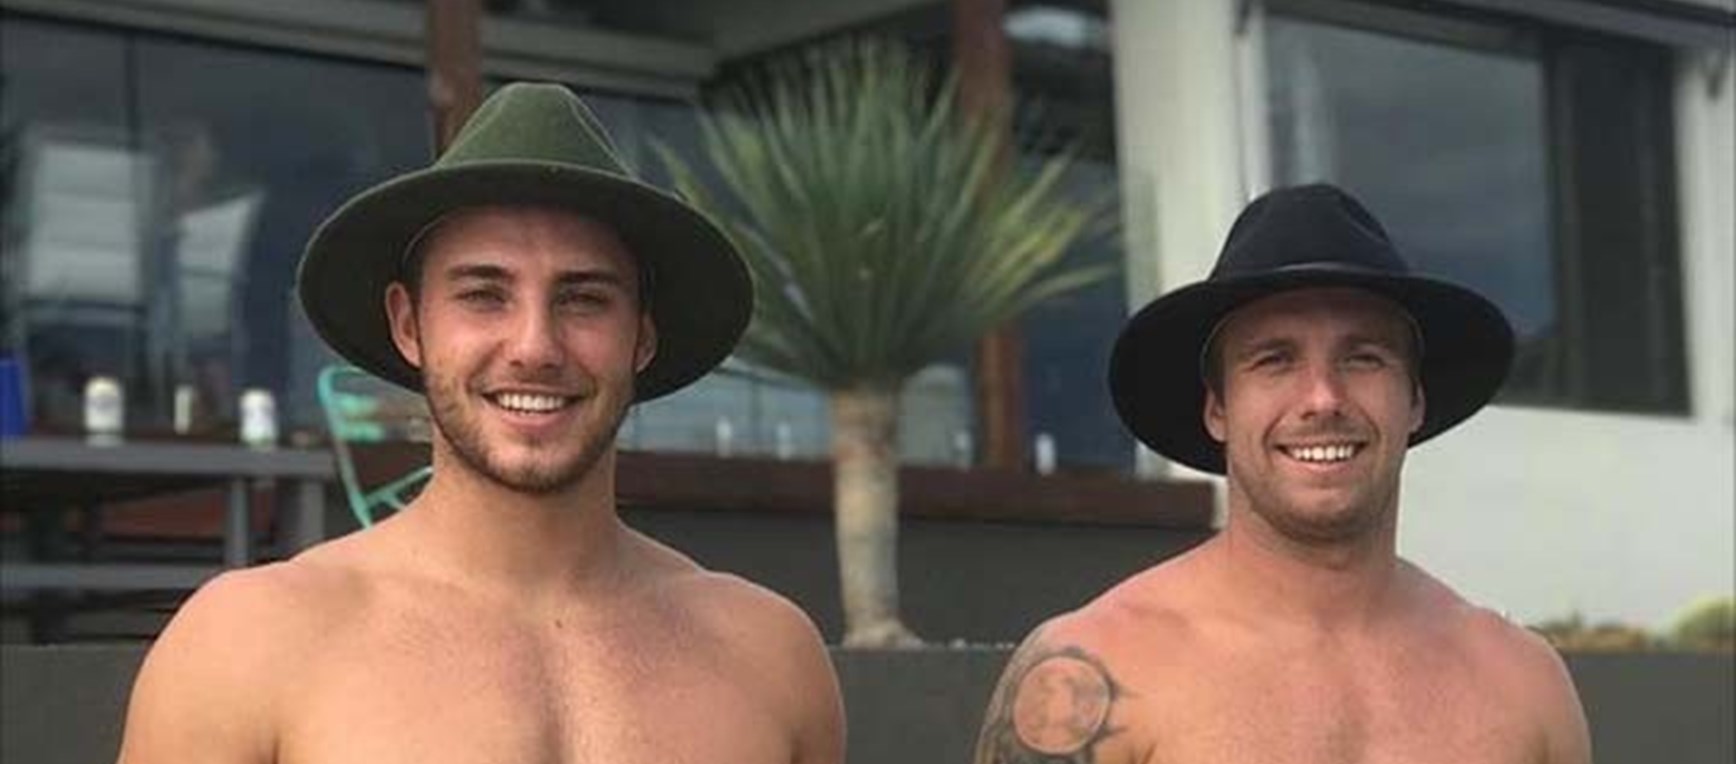 GALLERY: Player Holidays